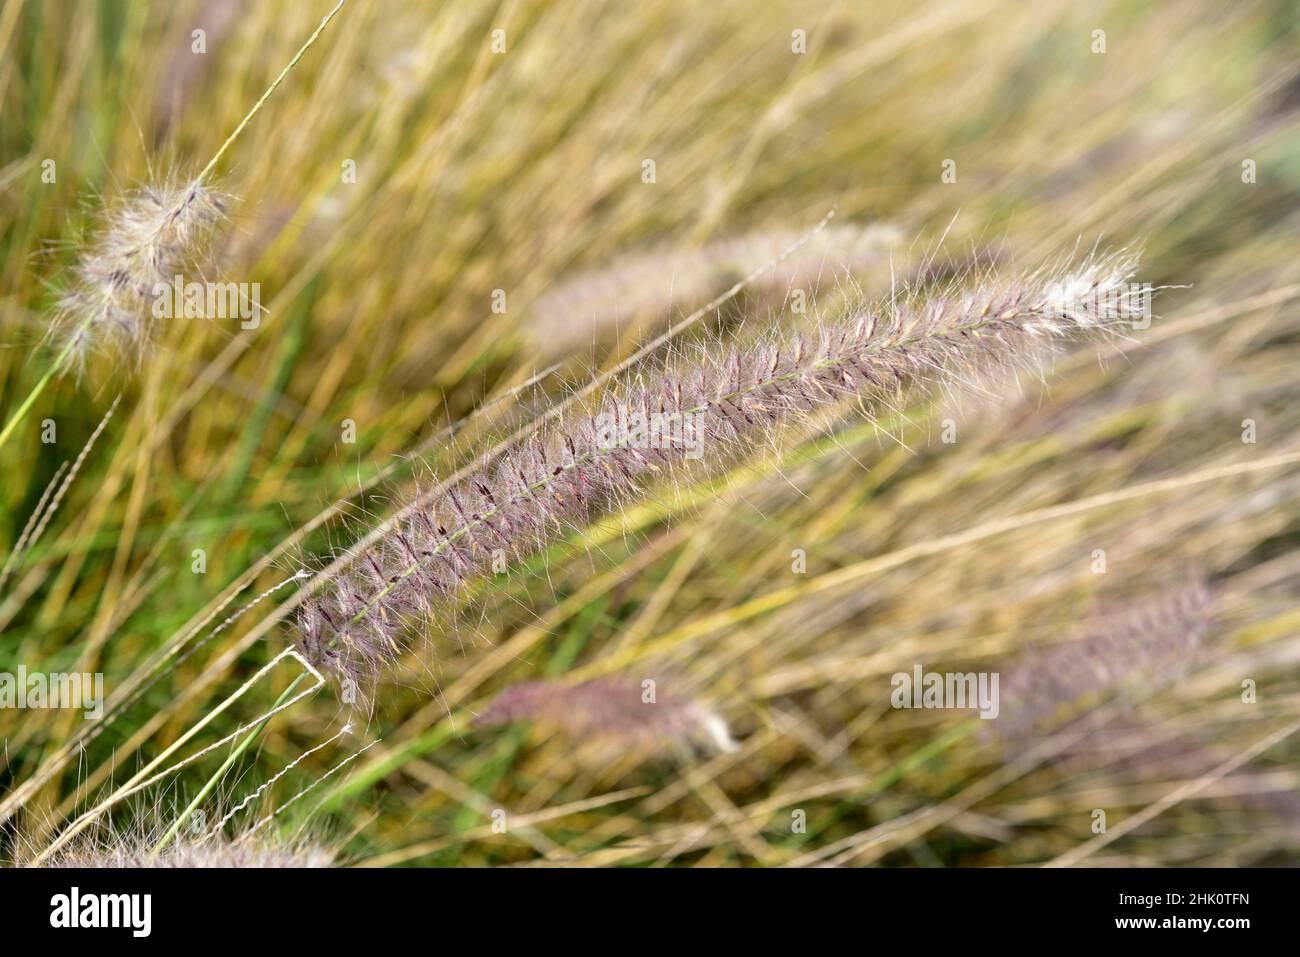 Rabo de gato (Pennisetum setaceum or Cenchrus setaceus) is a perennial herb native to east Africa, Middle East and southwestern Asia and naturalized Stock Photo